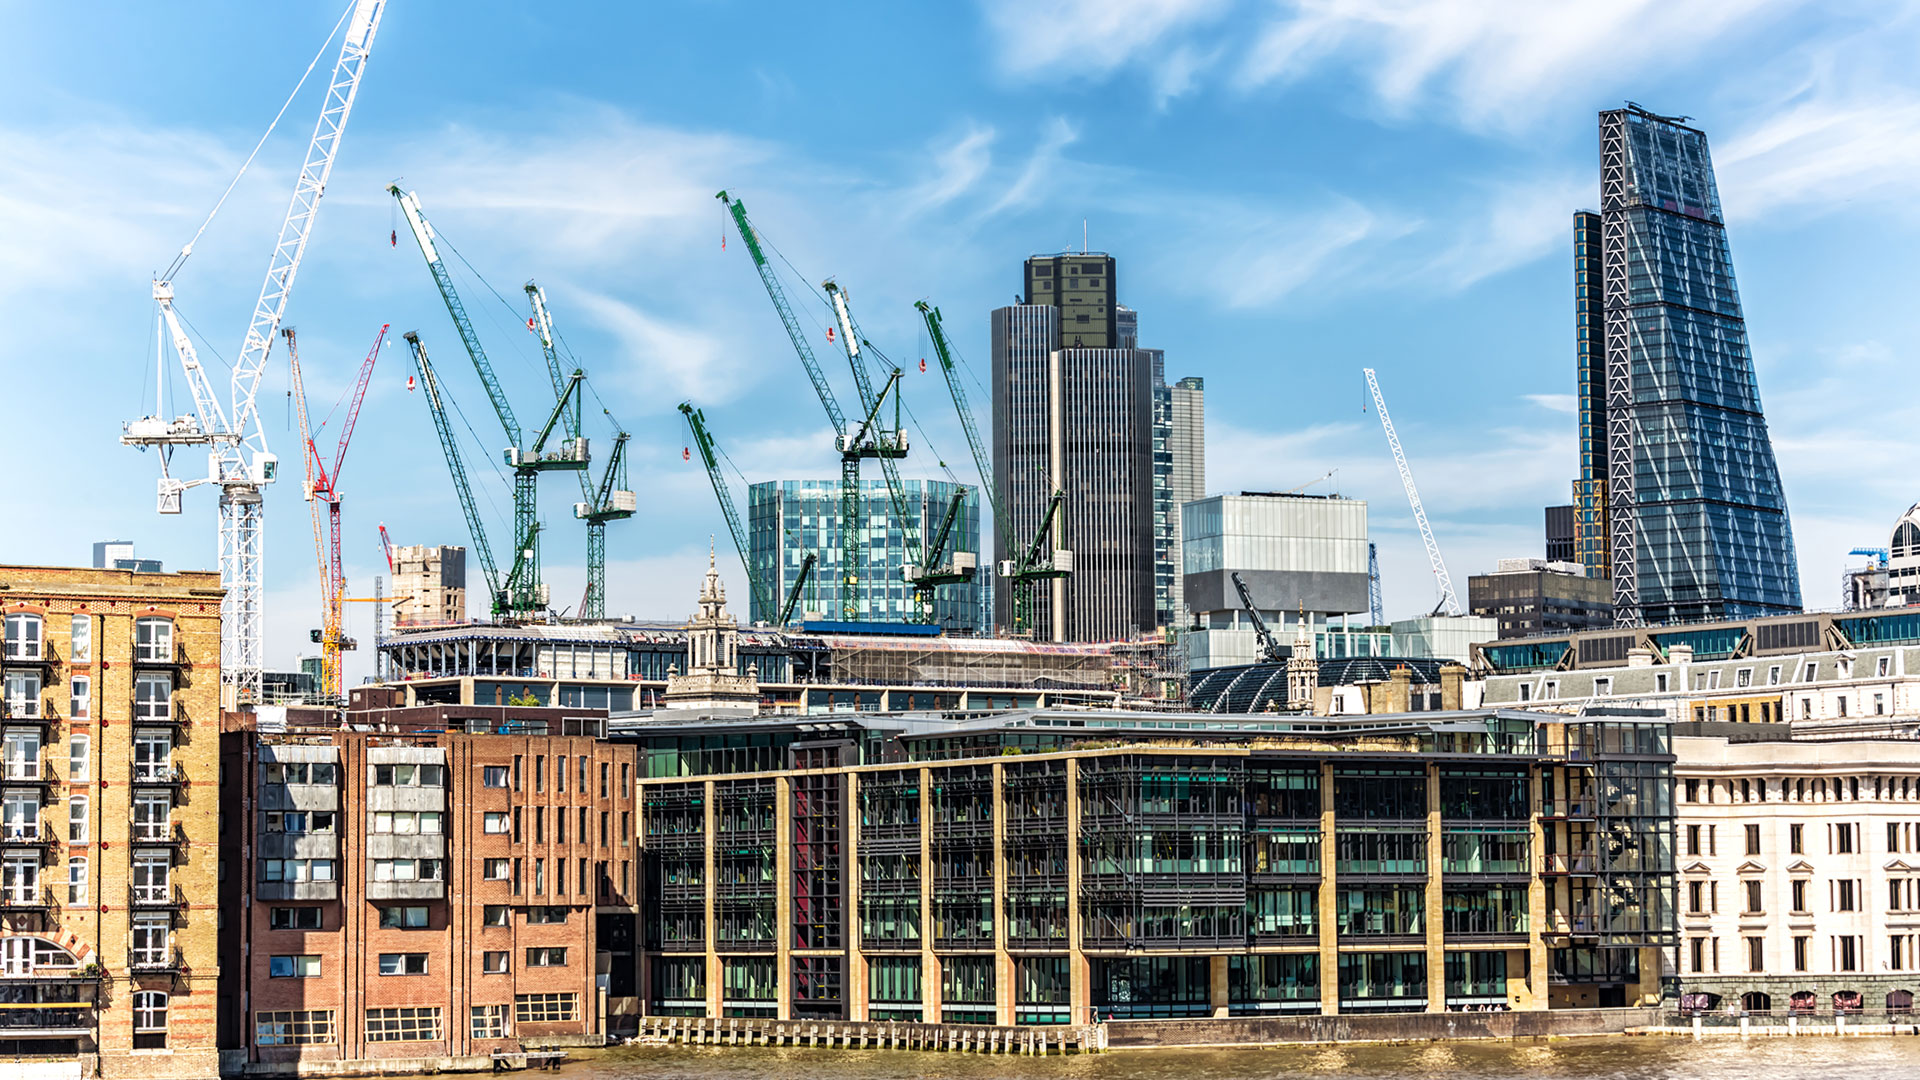 The City of London skyscape with cranes